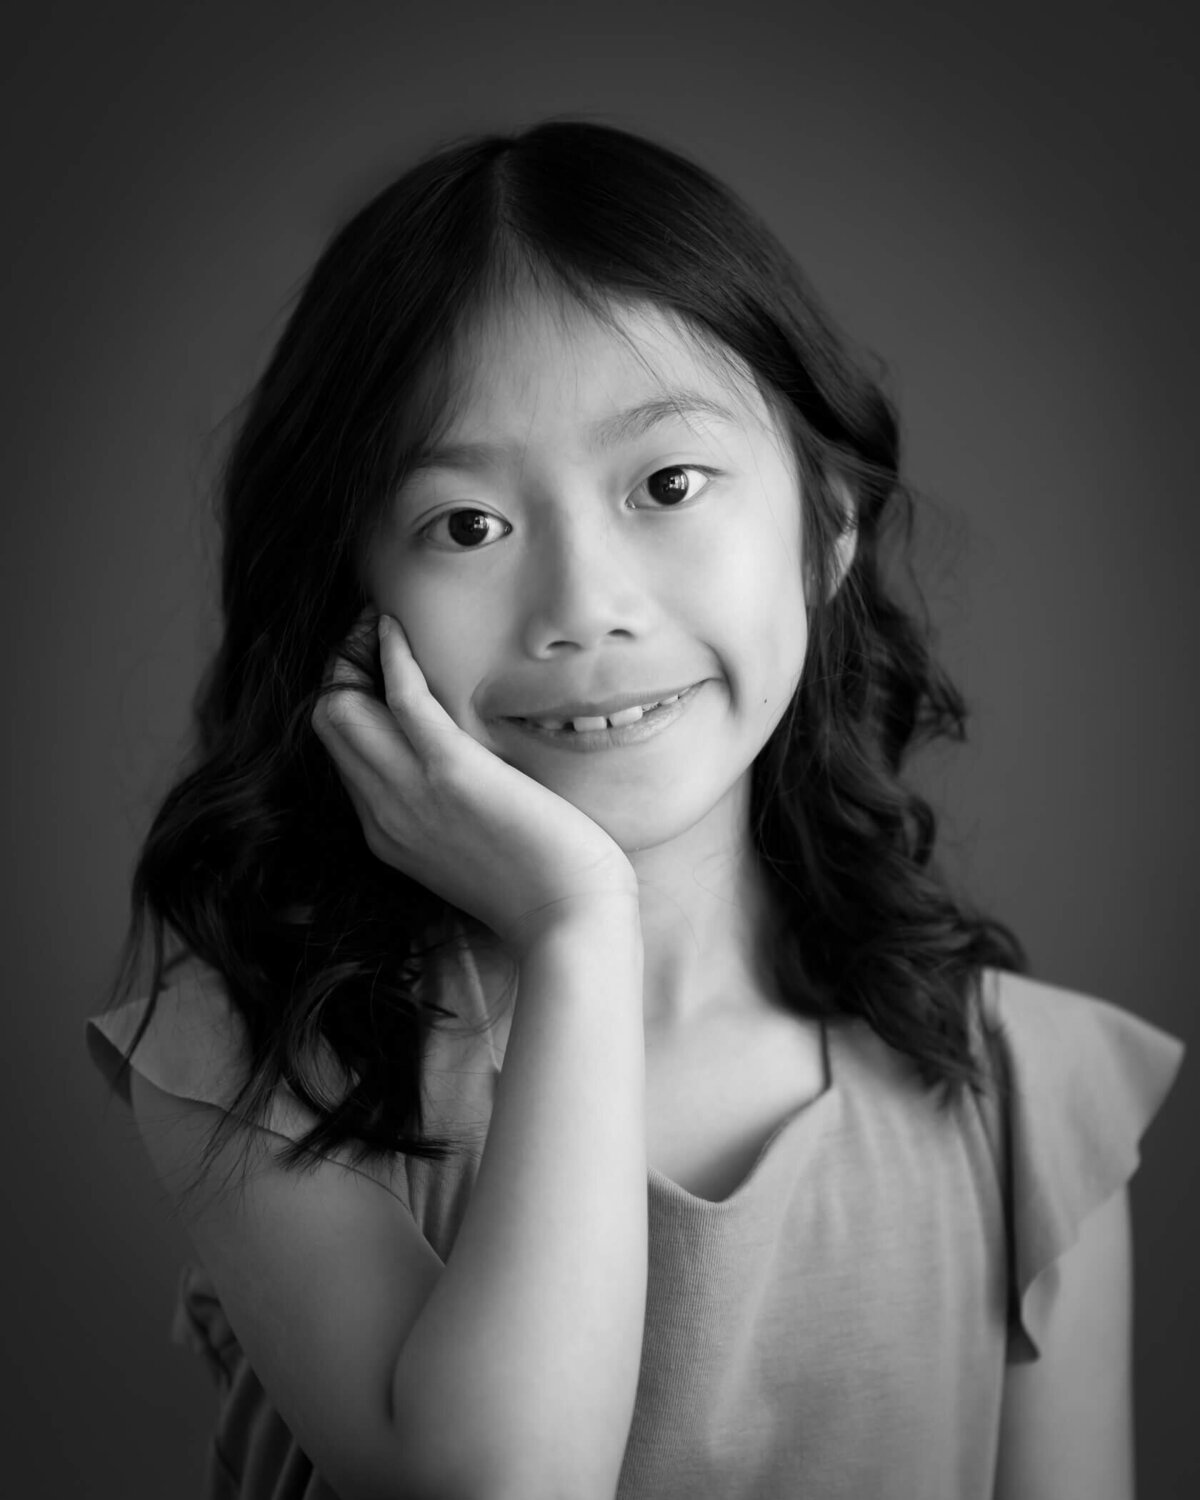 black & white photo of 10 year old girl resting face on hand and smiling